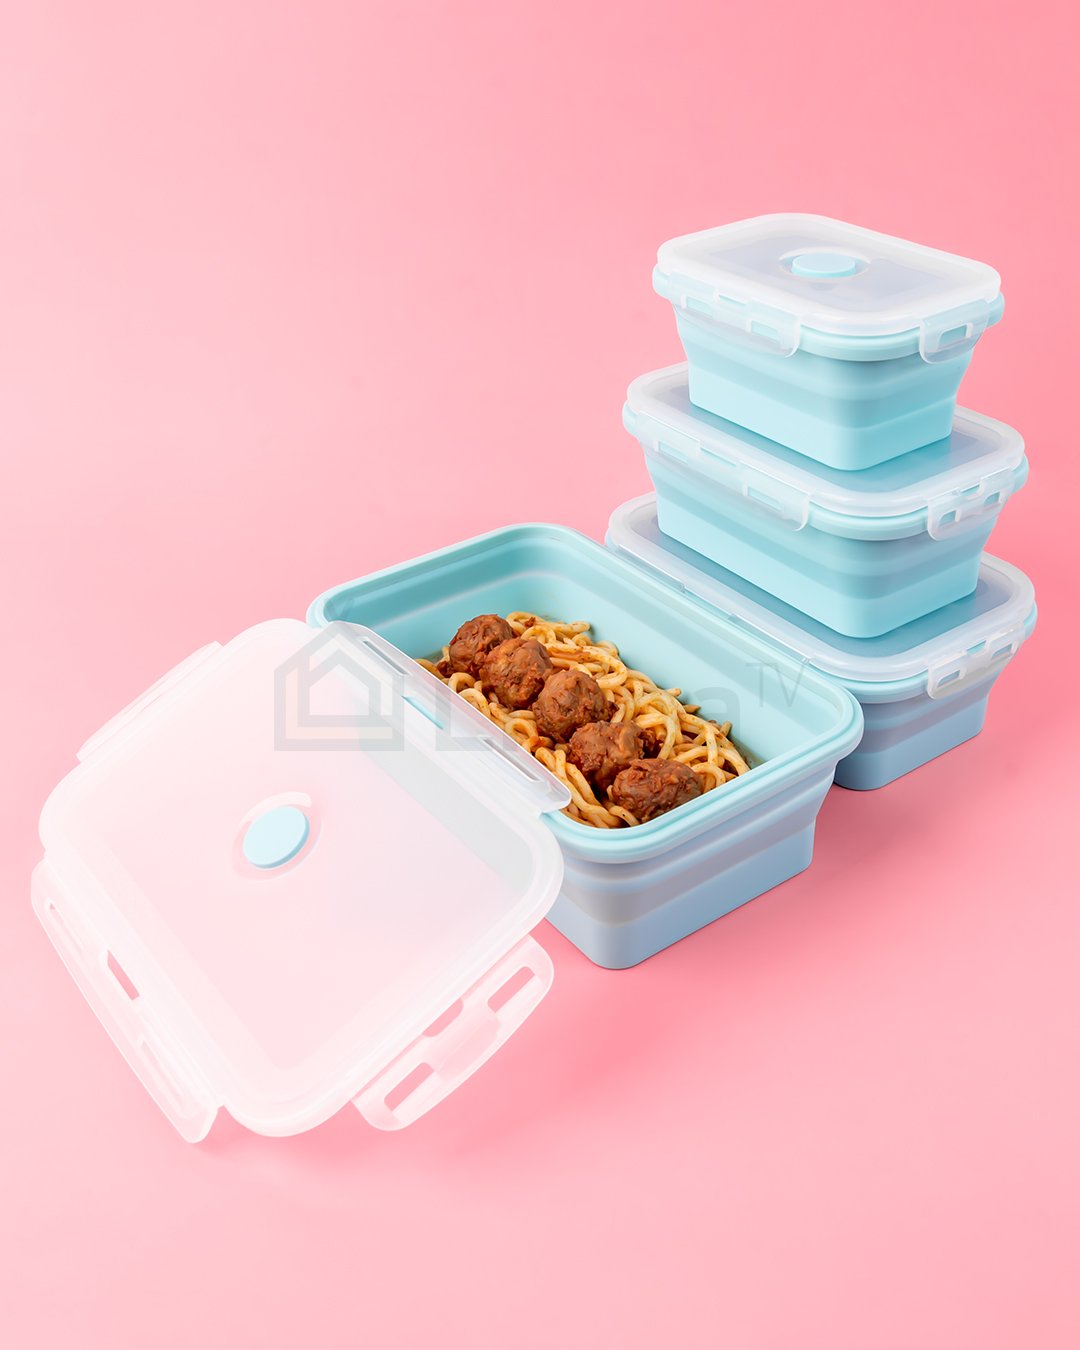 https://muslimahclothing.com/wp-content/uploads/2020/07/Lisa-Collapsible-Tupperware-Blue-6.jpg